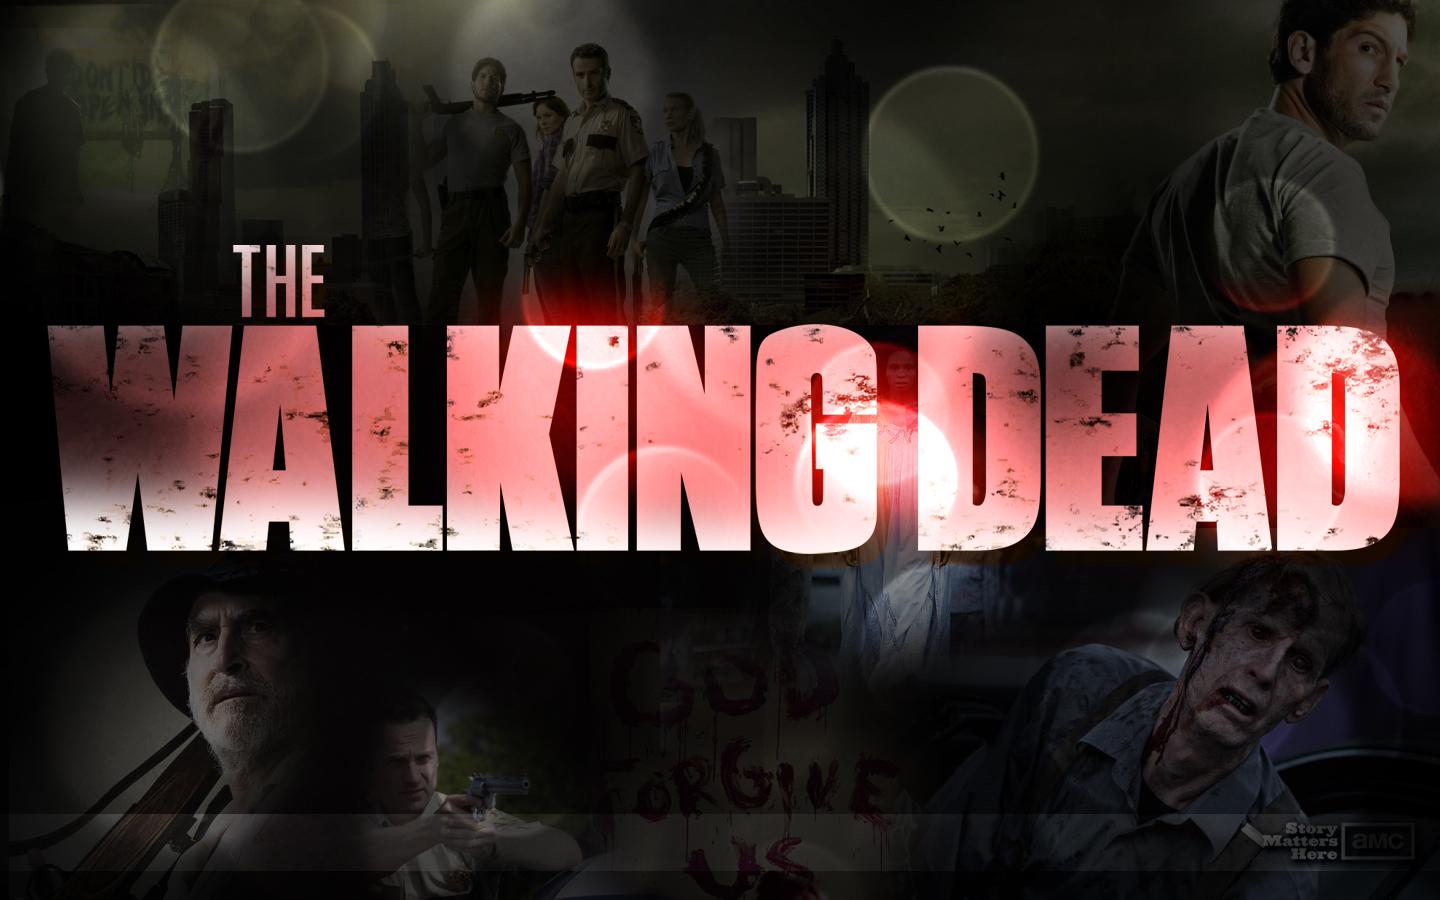 The Walking Dead is a television drama series developed by Frank 